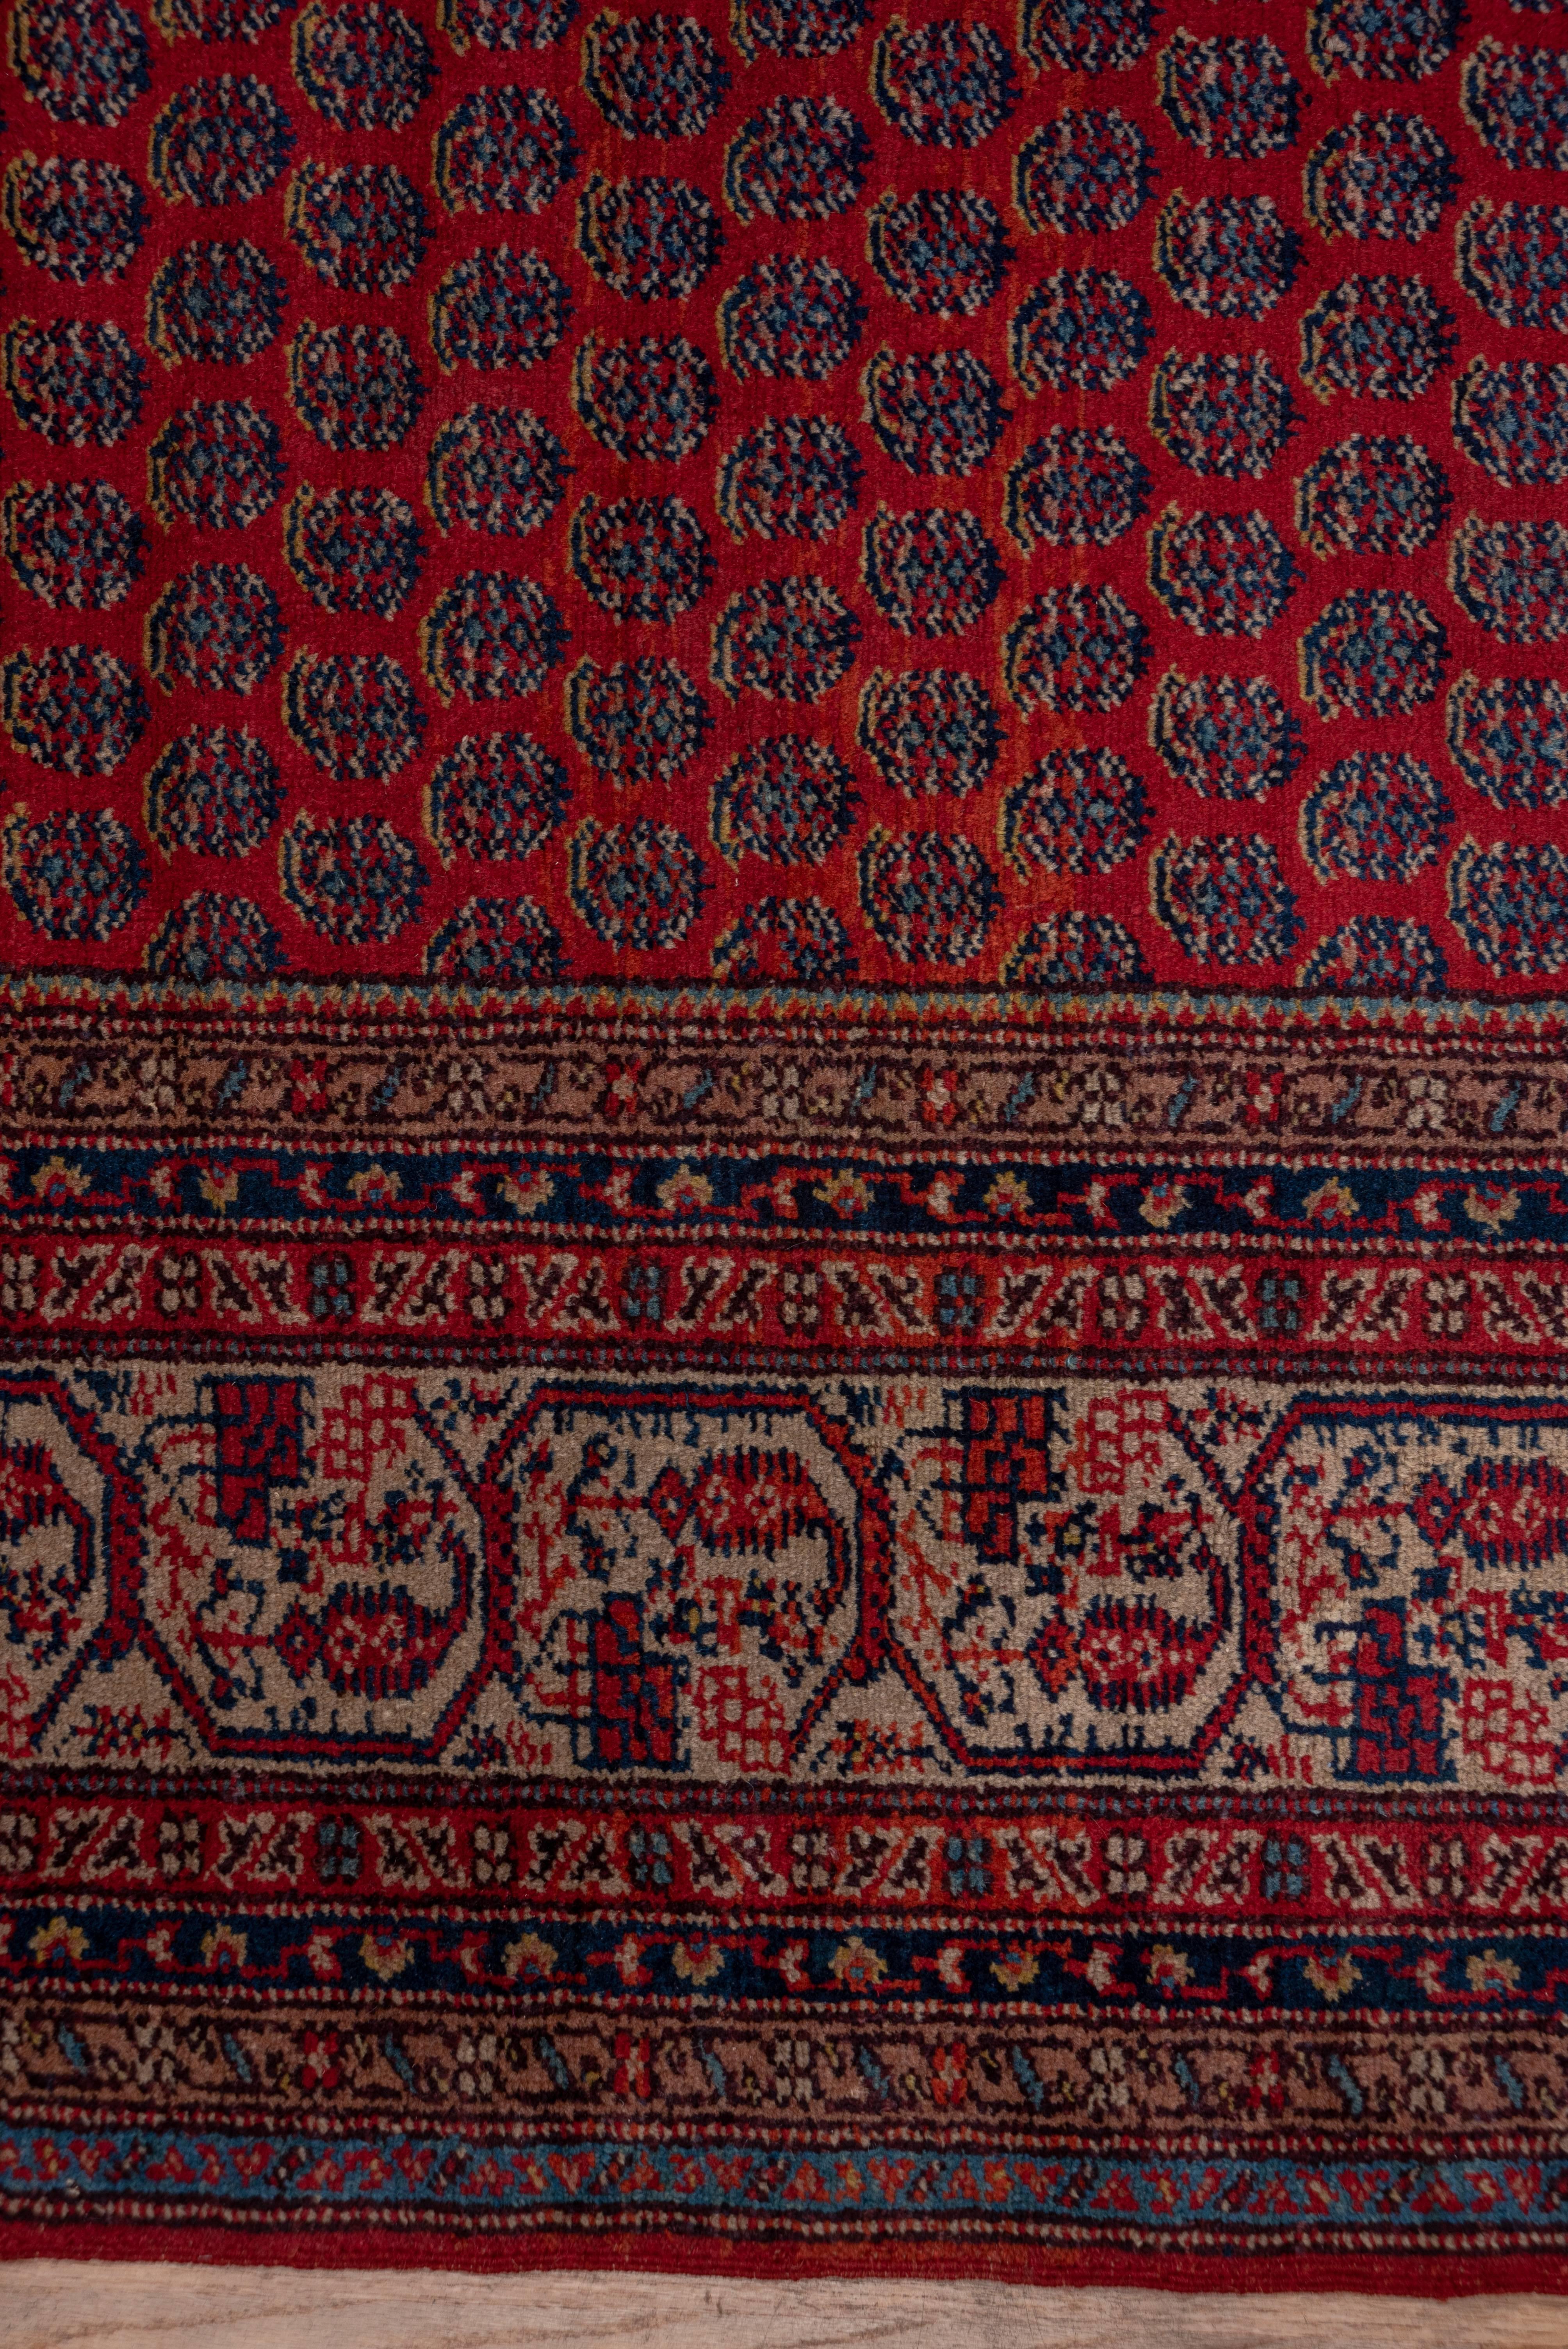 Wool Antique Persian Saraband Carpet, Red Allover Field, Circa 1930s For Sale